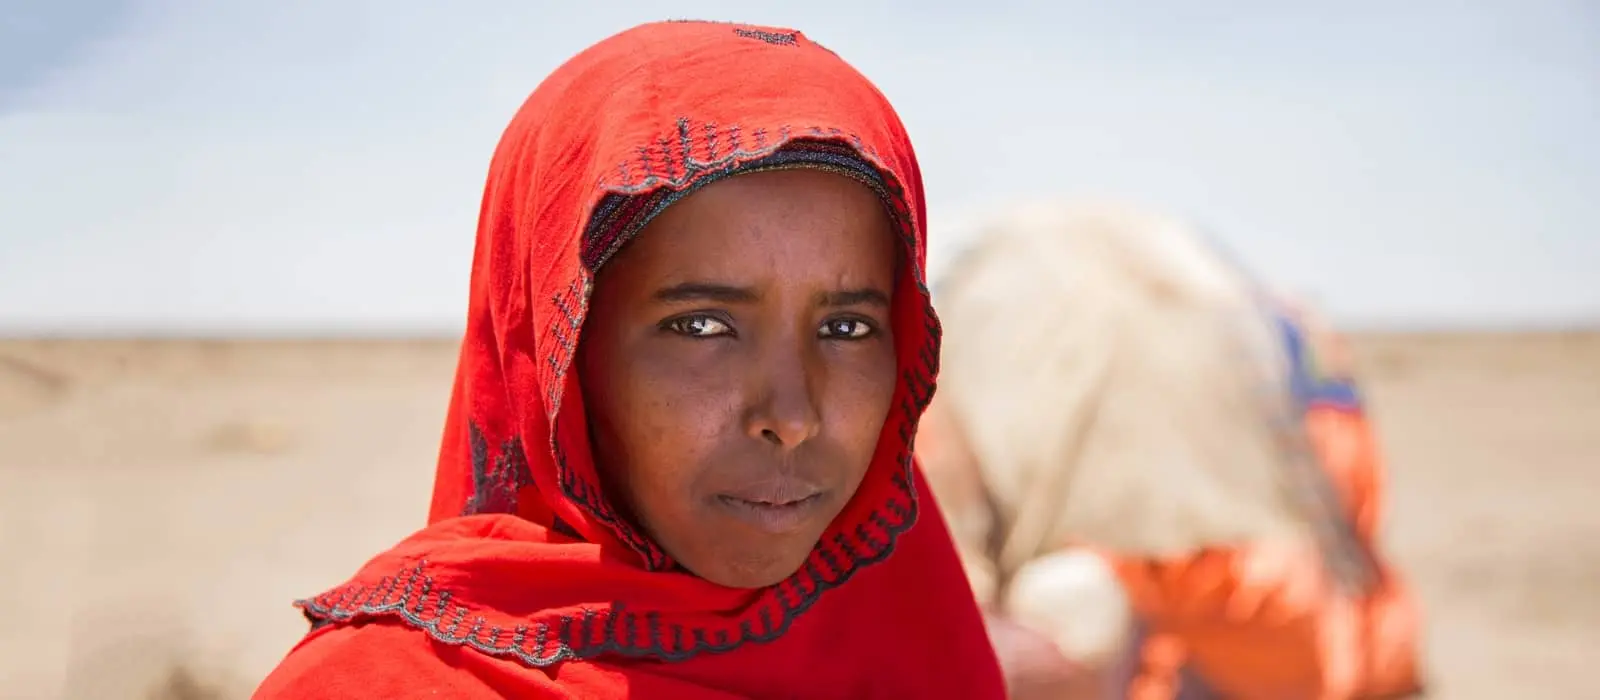 Liban, a mother of three, who left her home in Somalia in search of pasture for her livestock